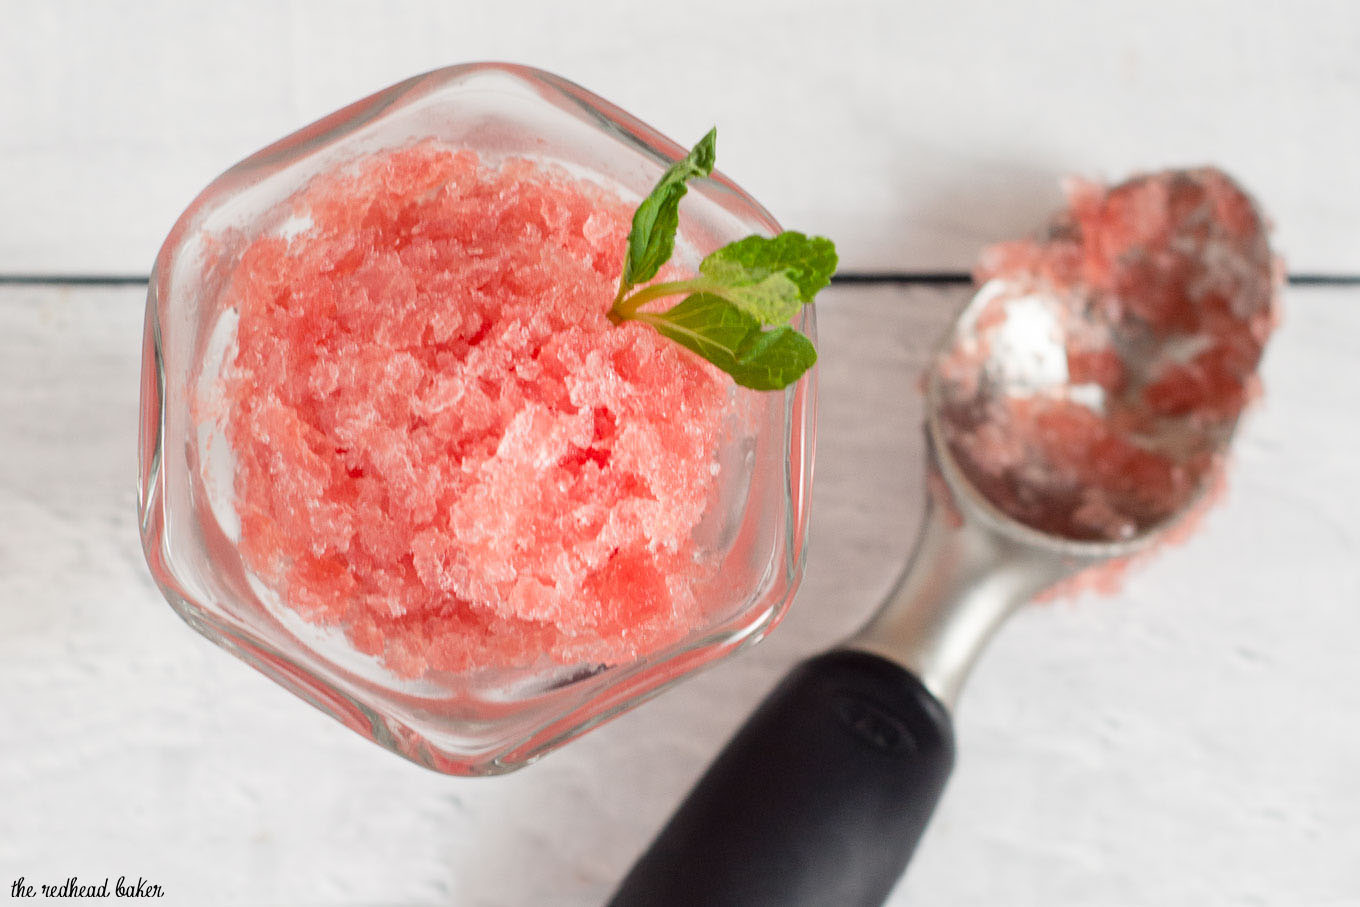 Granita is a Sicilian dessert made from crushed ice and flavoring. This watermelon mint granita is light and refreshing, perfect for a summer day! 